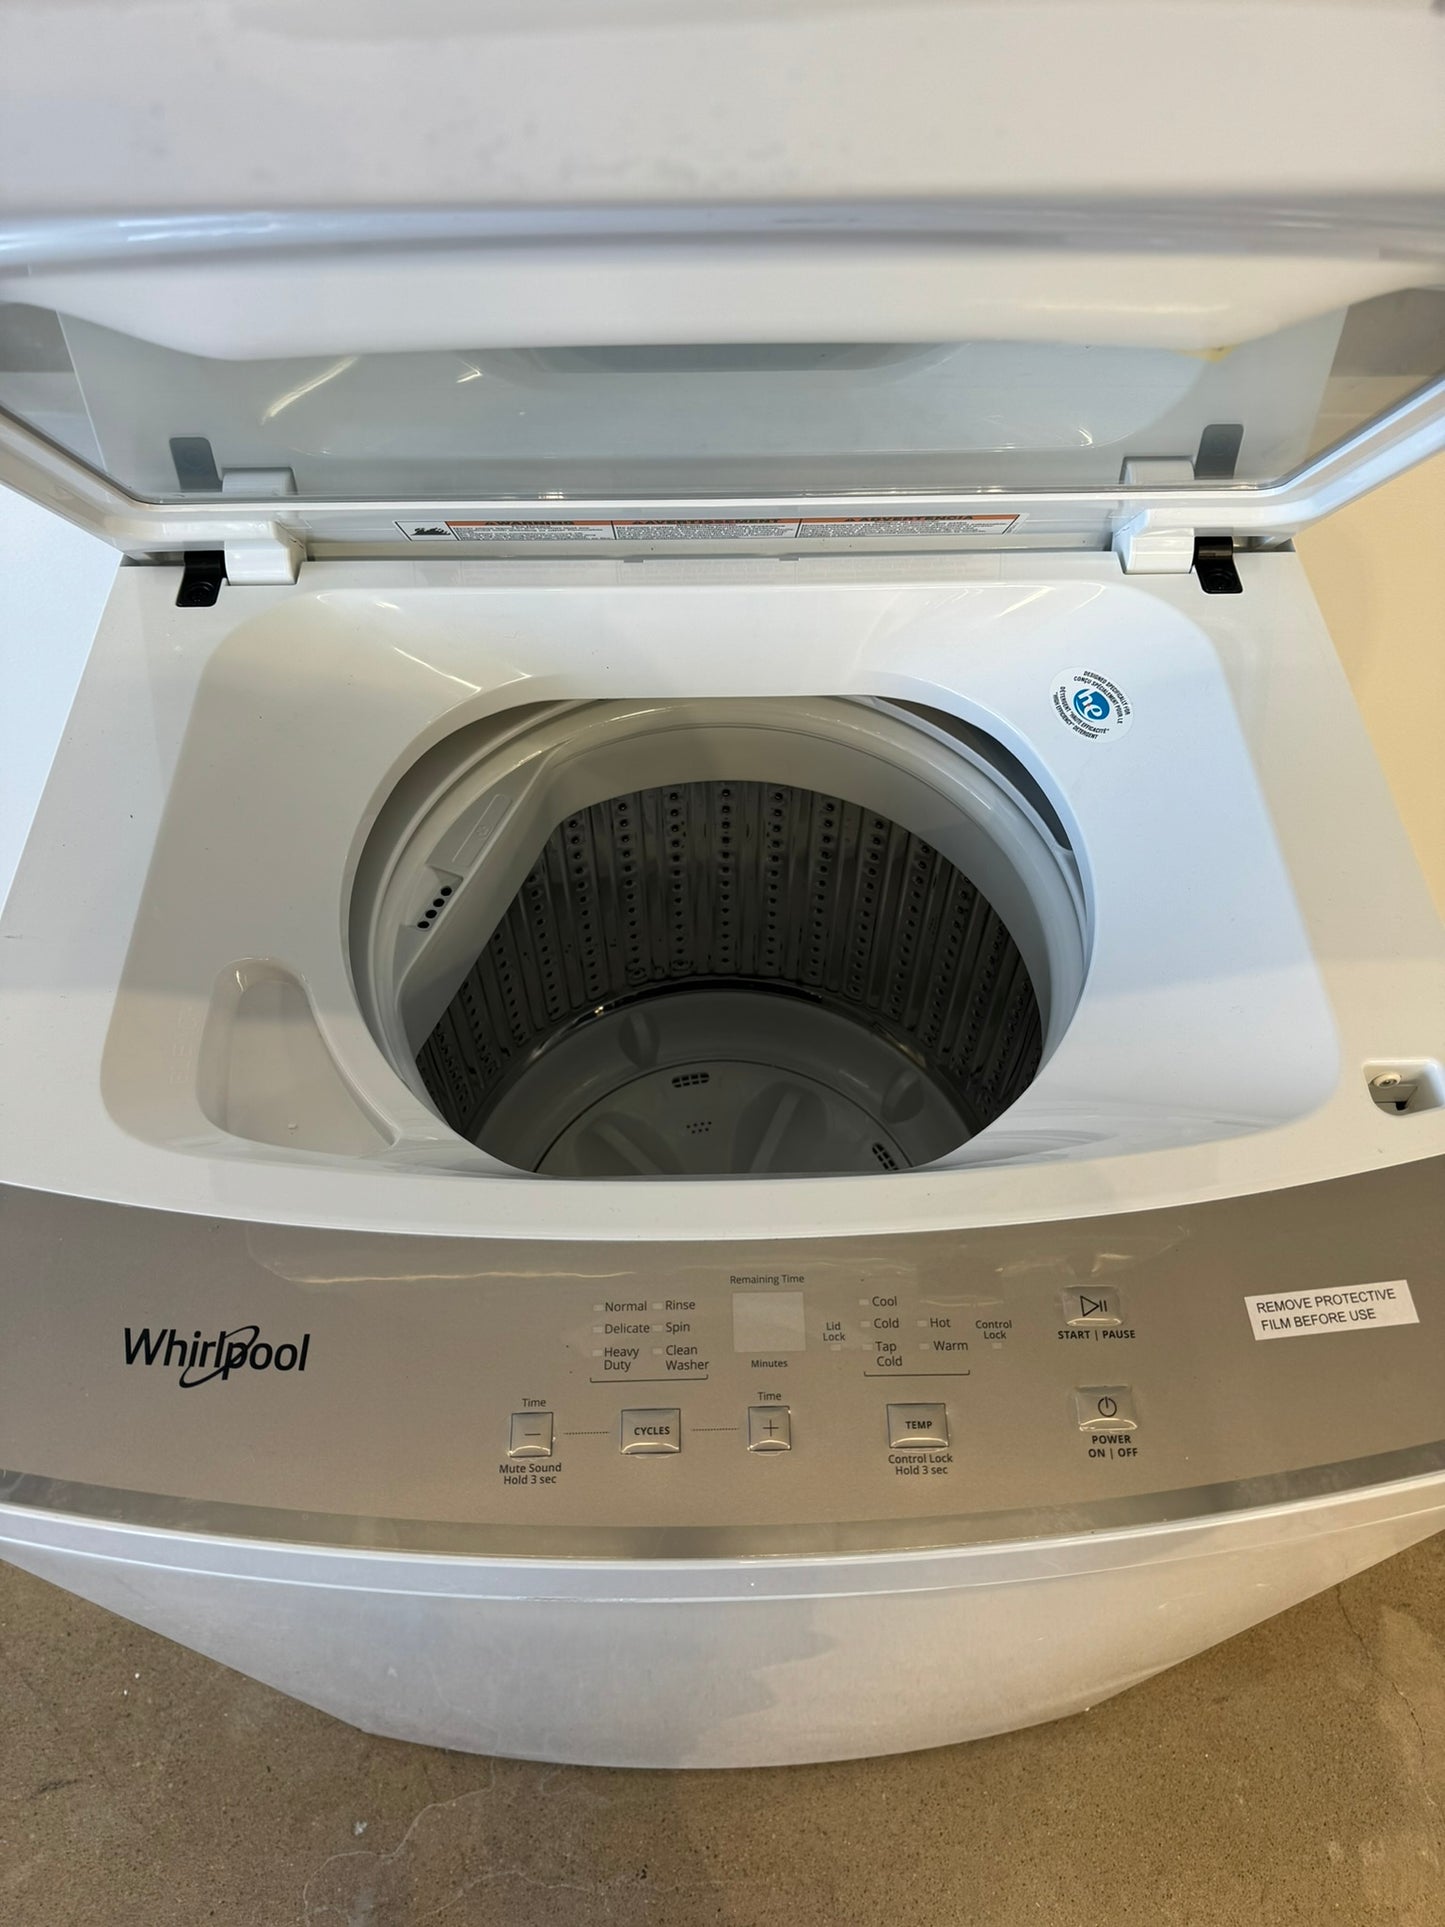 NEW WHIRLPOOL TOP LOAD WASHER ELECTRIC DRYER STACKED LAUNDRY UNIT MODEL: WET4024HW  WAS10039R